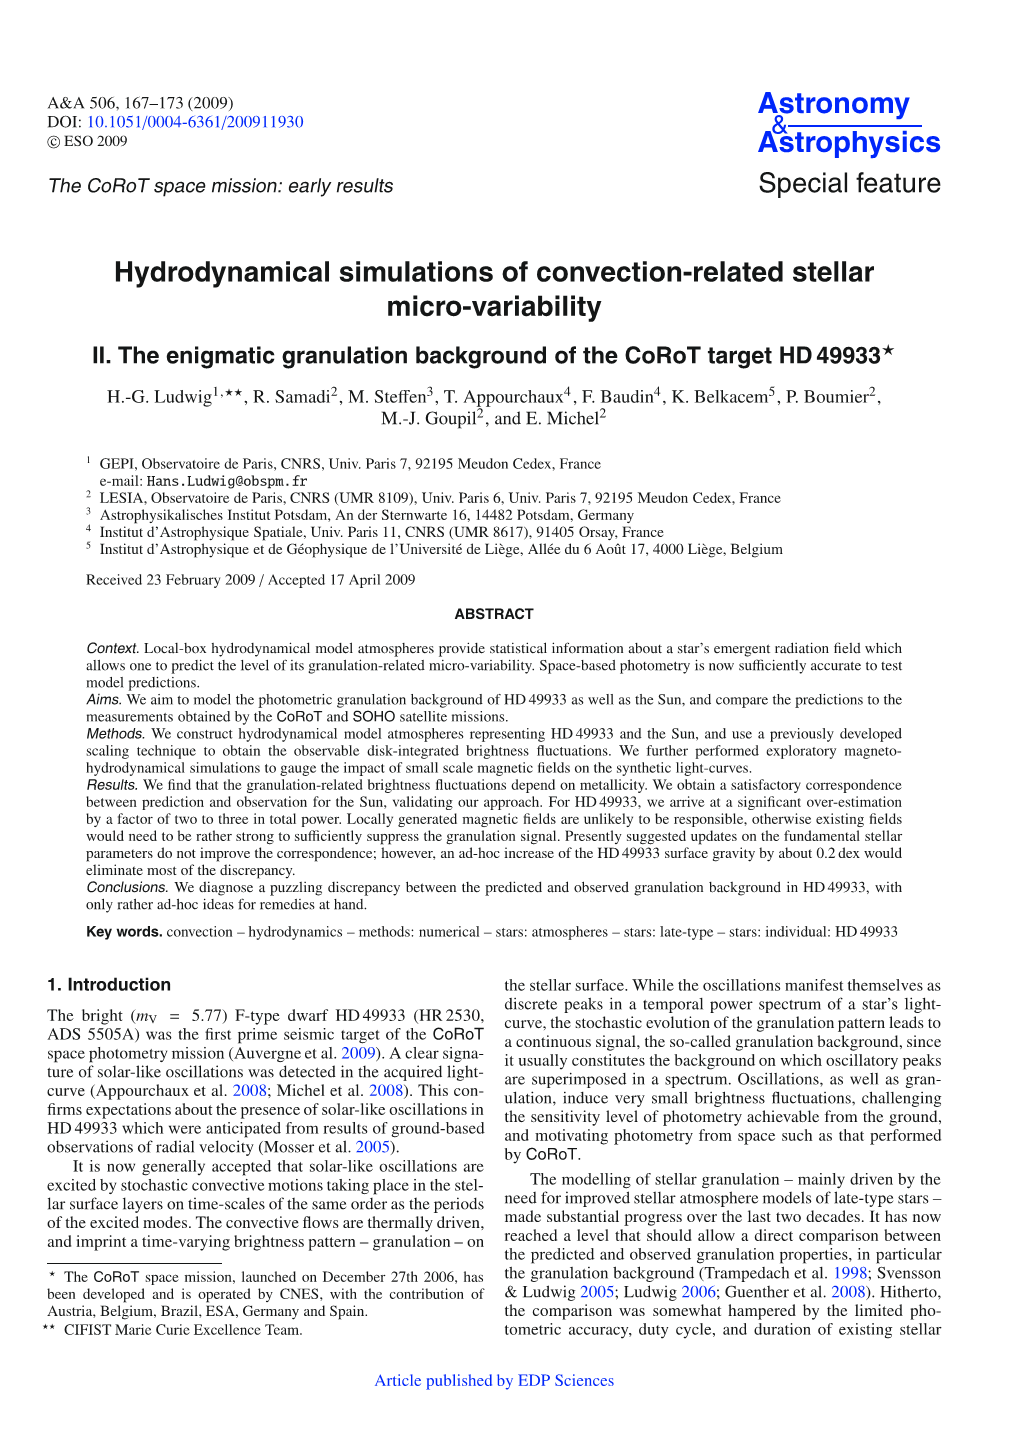 Hydrodynamical Simulations of Convection-Related Stellar Micro-Variability II